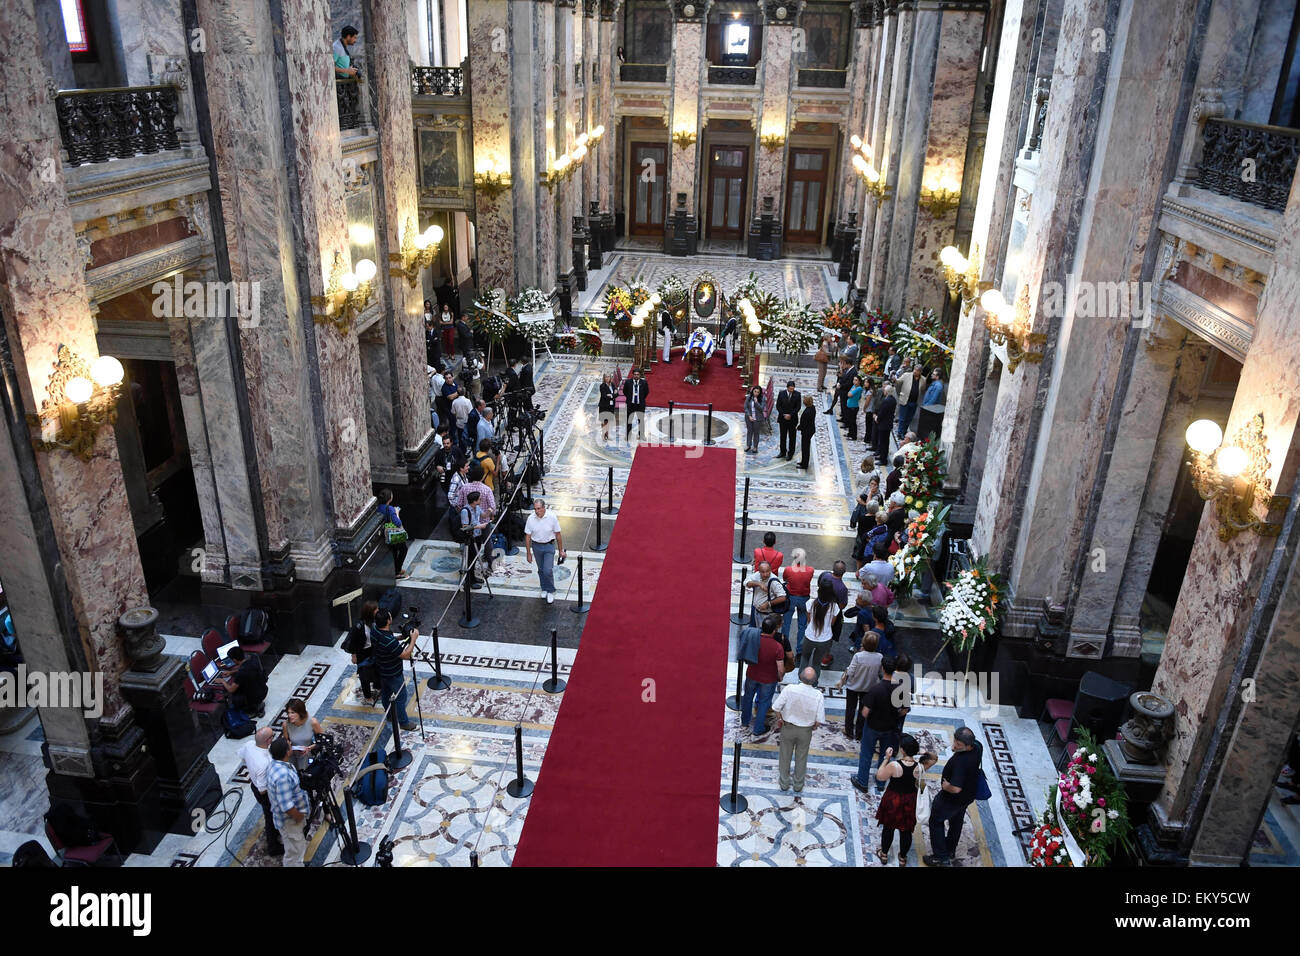 Montevideo, Uruguay. 14th Apr, 2015. Members of an honor guard watch over the coffin of Uruguayan writer Eduardo Galeano in the Lost Steps Hall of the Legislative Palace in Montevideo, capital of Uruguay, on April 14, 2015. Uruguayan leftist writer Eduardo Galeano, author of the seminal book 'Open Veins of Latin America,' died Monday in Montevideo at the age of 74. Credit:  Nicolas Celaya/Xinhua/Alamy Live News Stock Photo